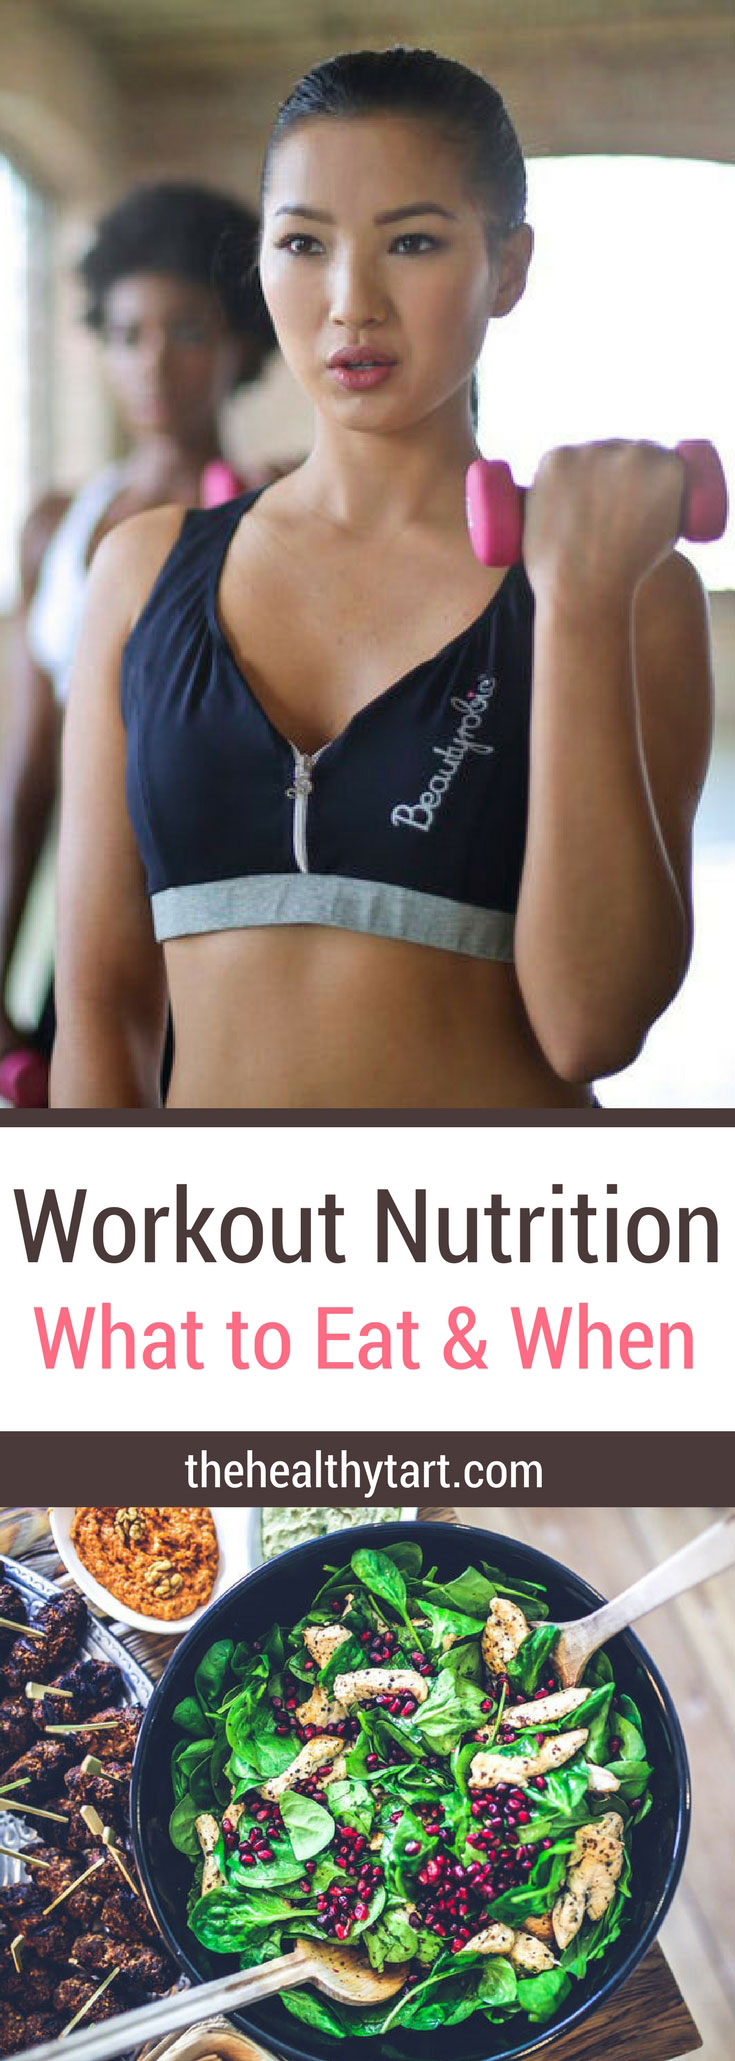 Work Out Nutrition- What to Eat and When